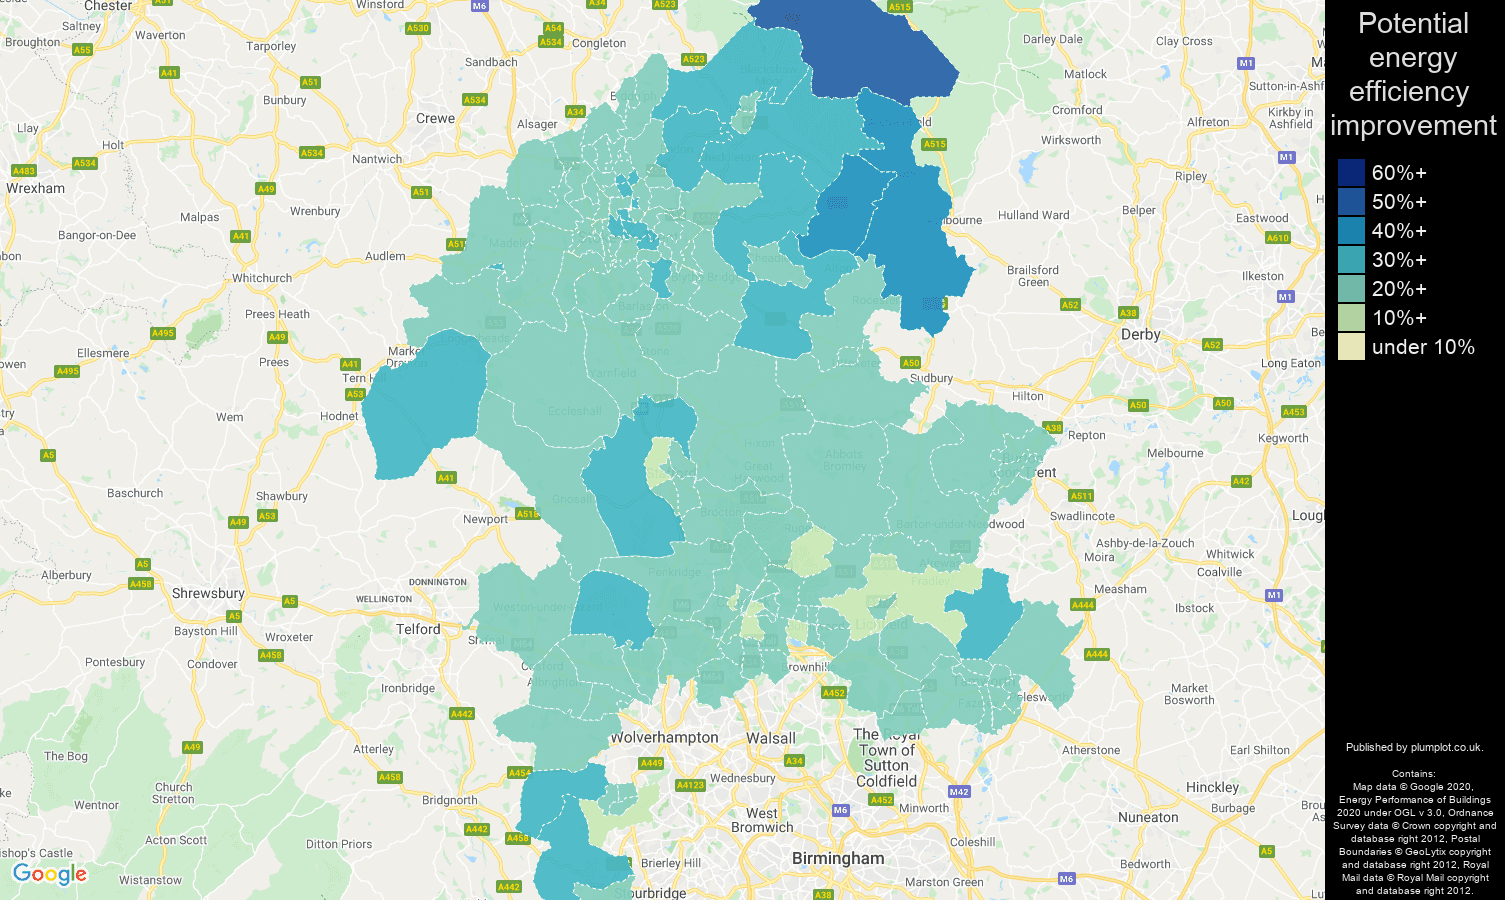 Staffordshire map of potential energy efficiency improvement of houses